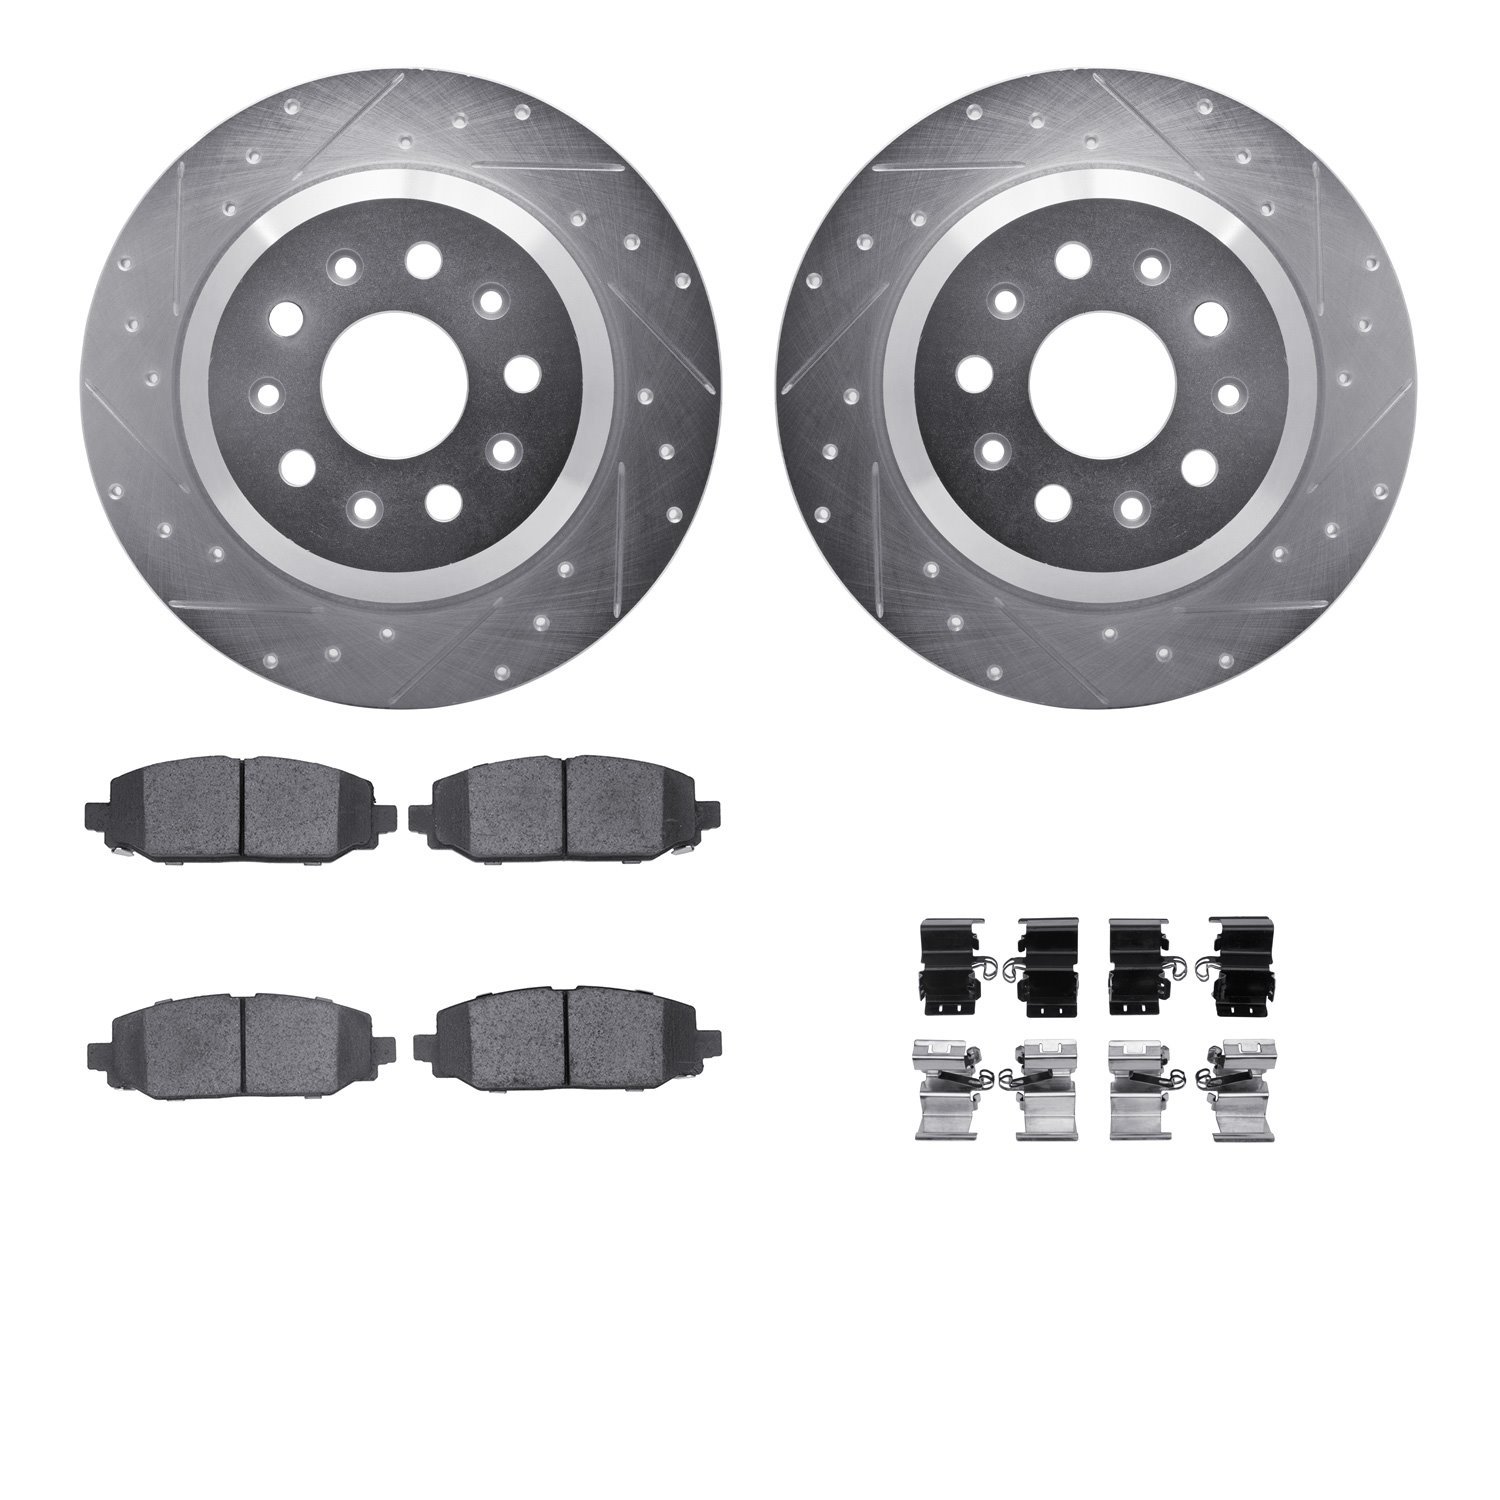 7412-42047 Drilled/Slotted Brake Rotors with Ultimate-Duty Brake Pads Kit & Hardware [Silver], Fits Select Mopar, Position: Rear